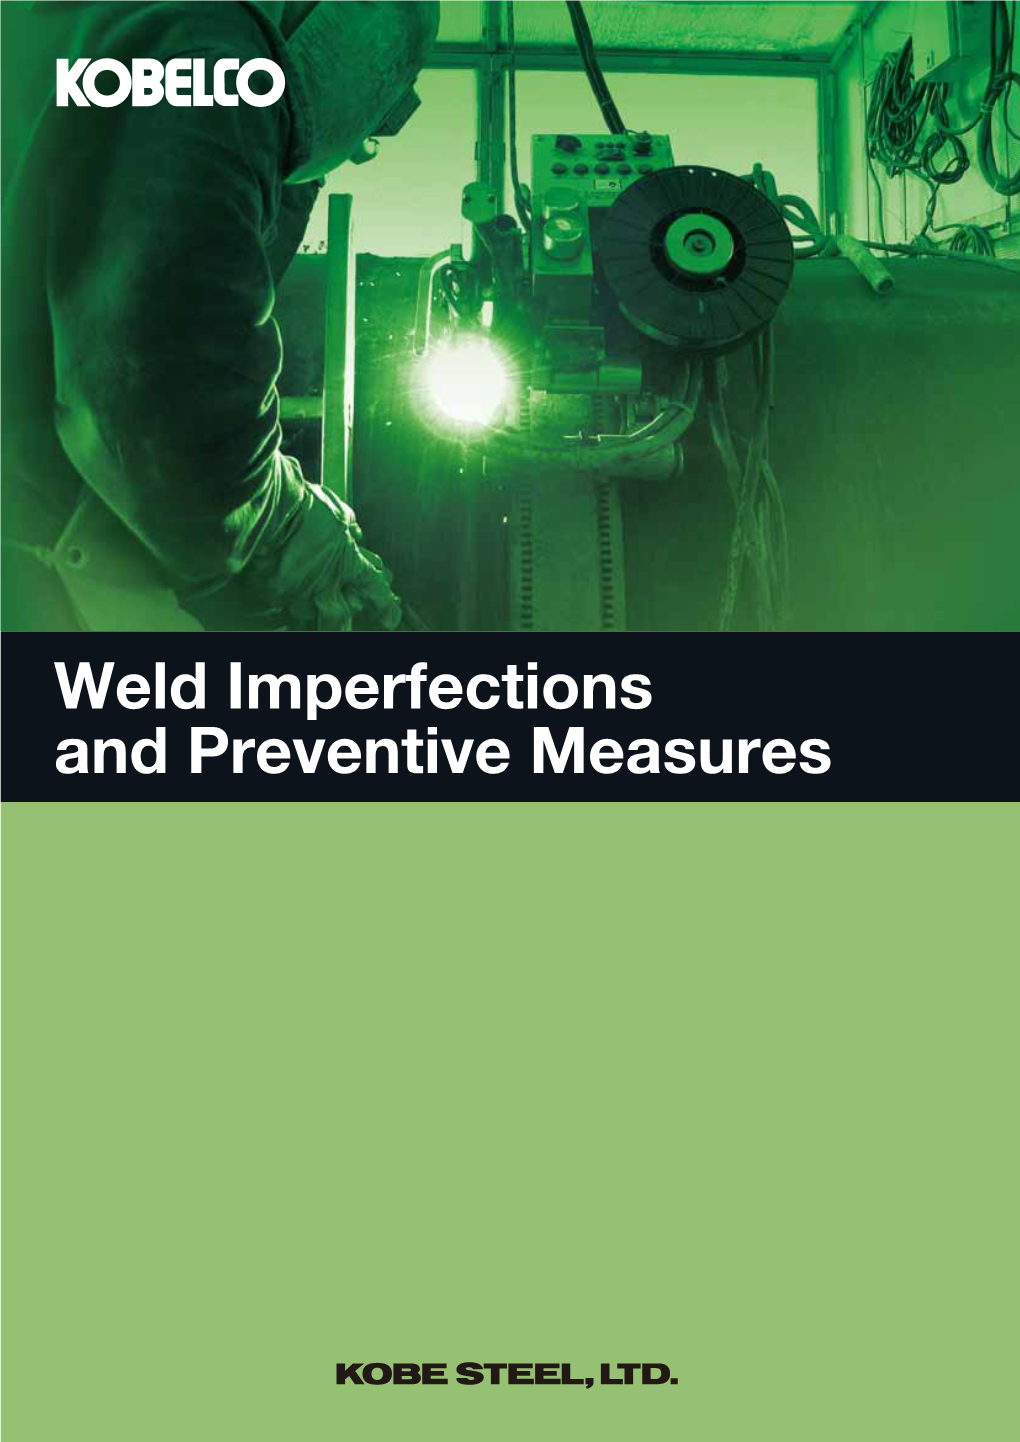 Weld Imperfections and Preventive Measures Weld Imperfections and Preventive Measures